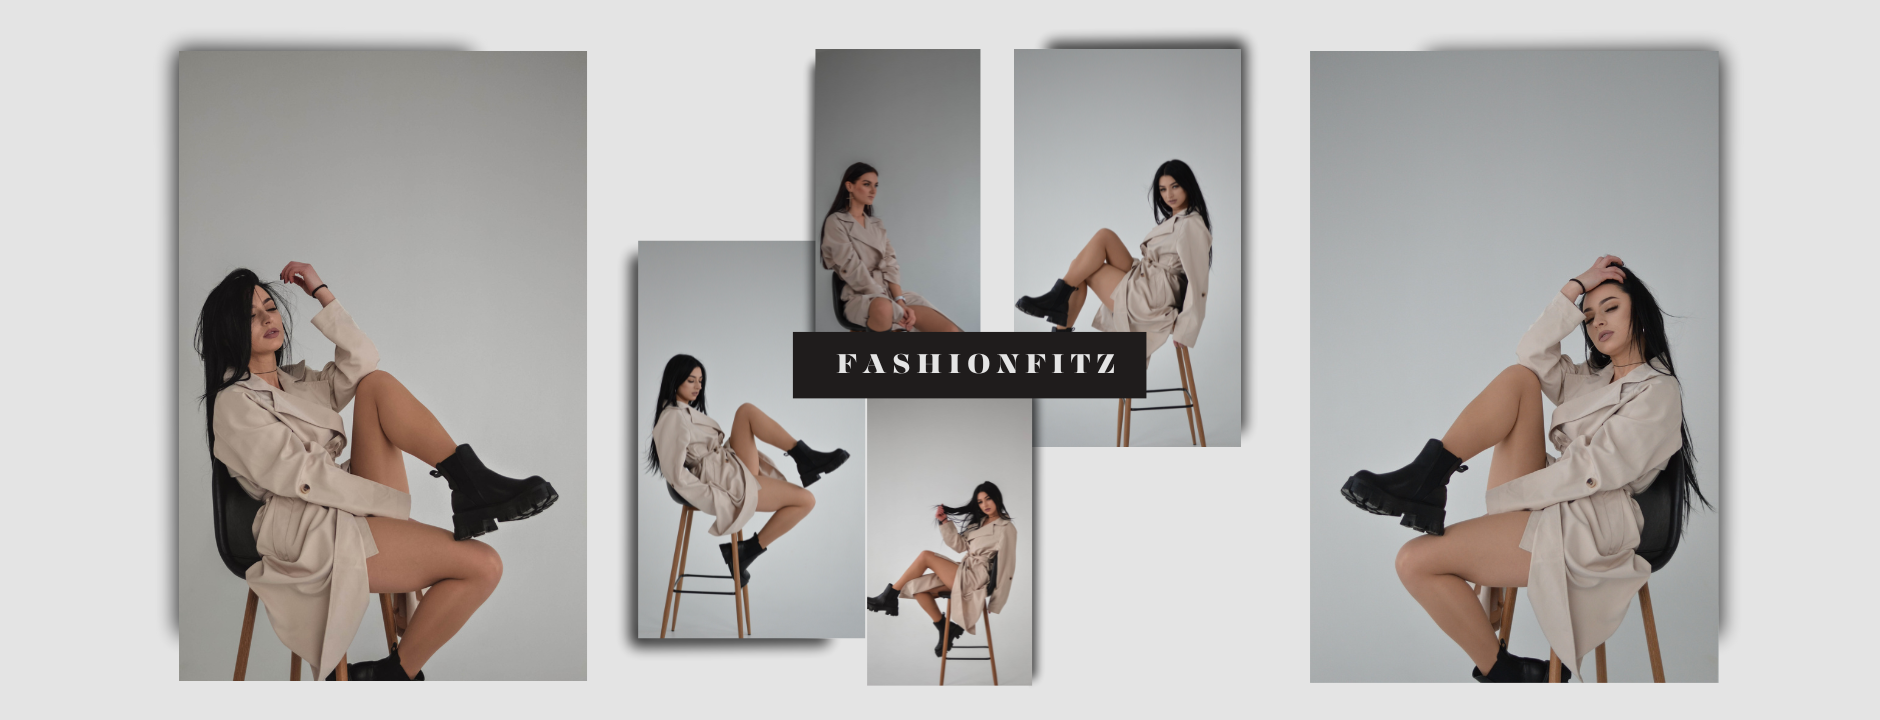 Discover trapstar-inspired outfits for women at fashionfitz